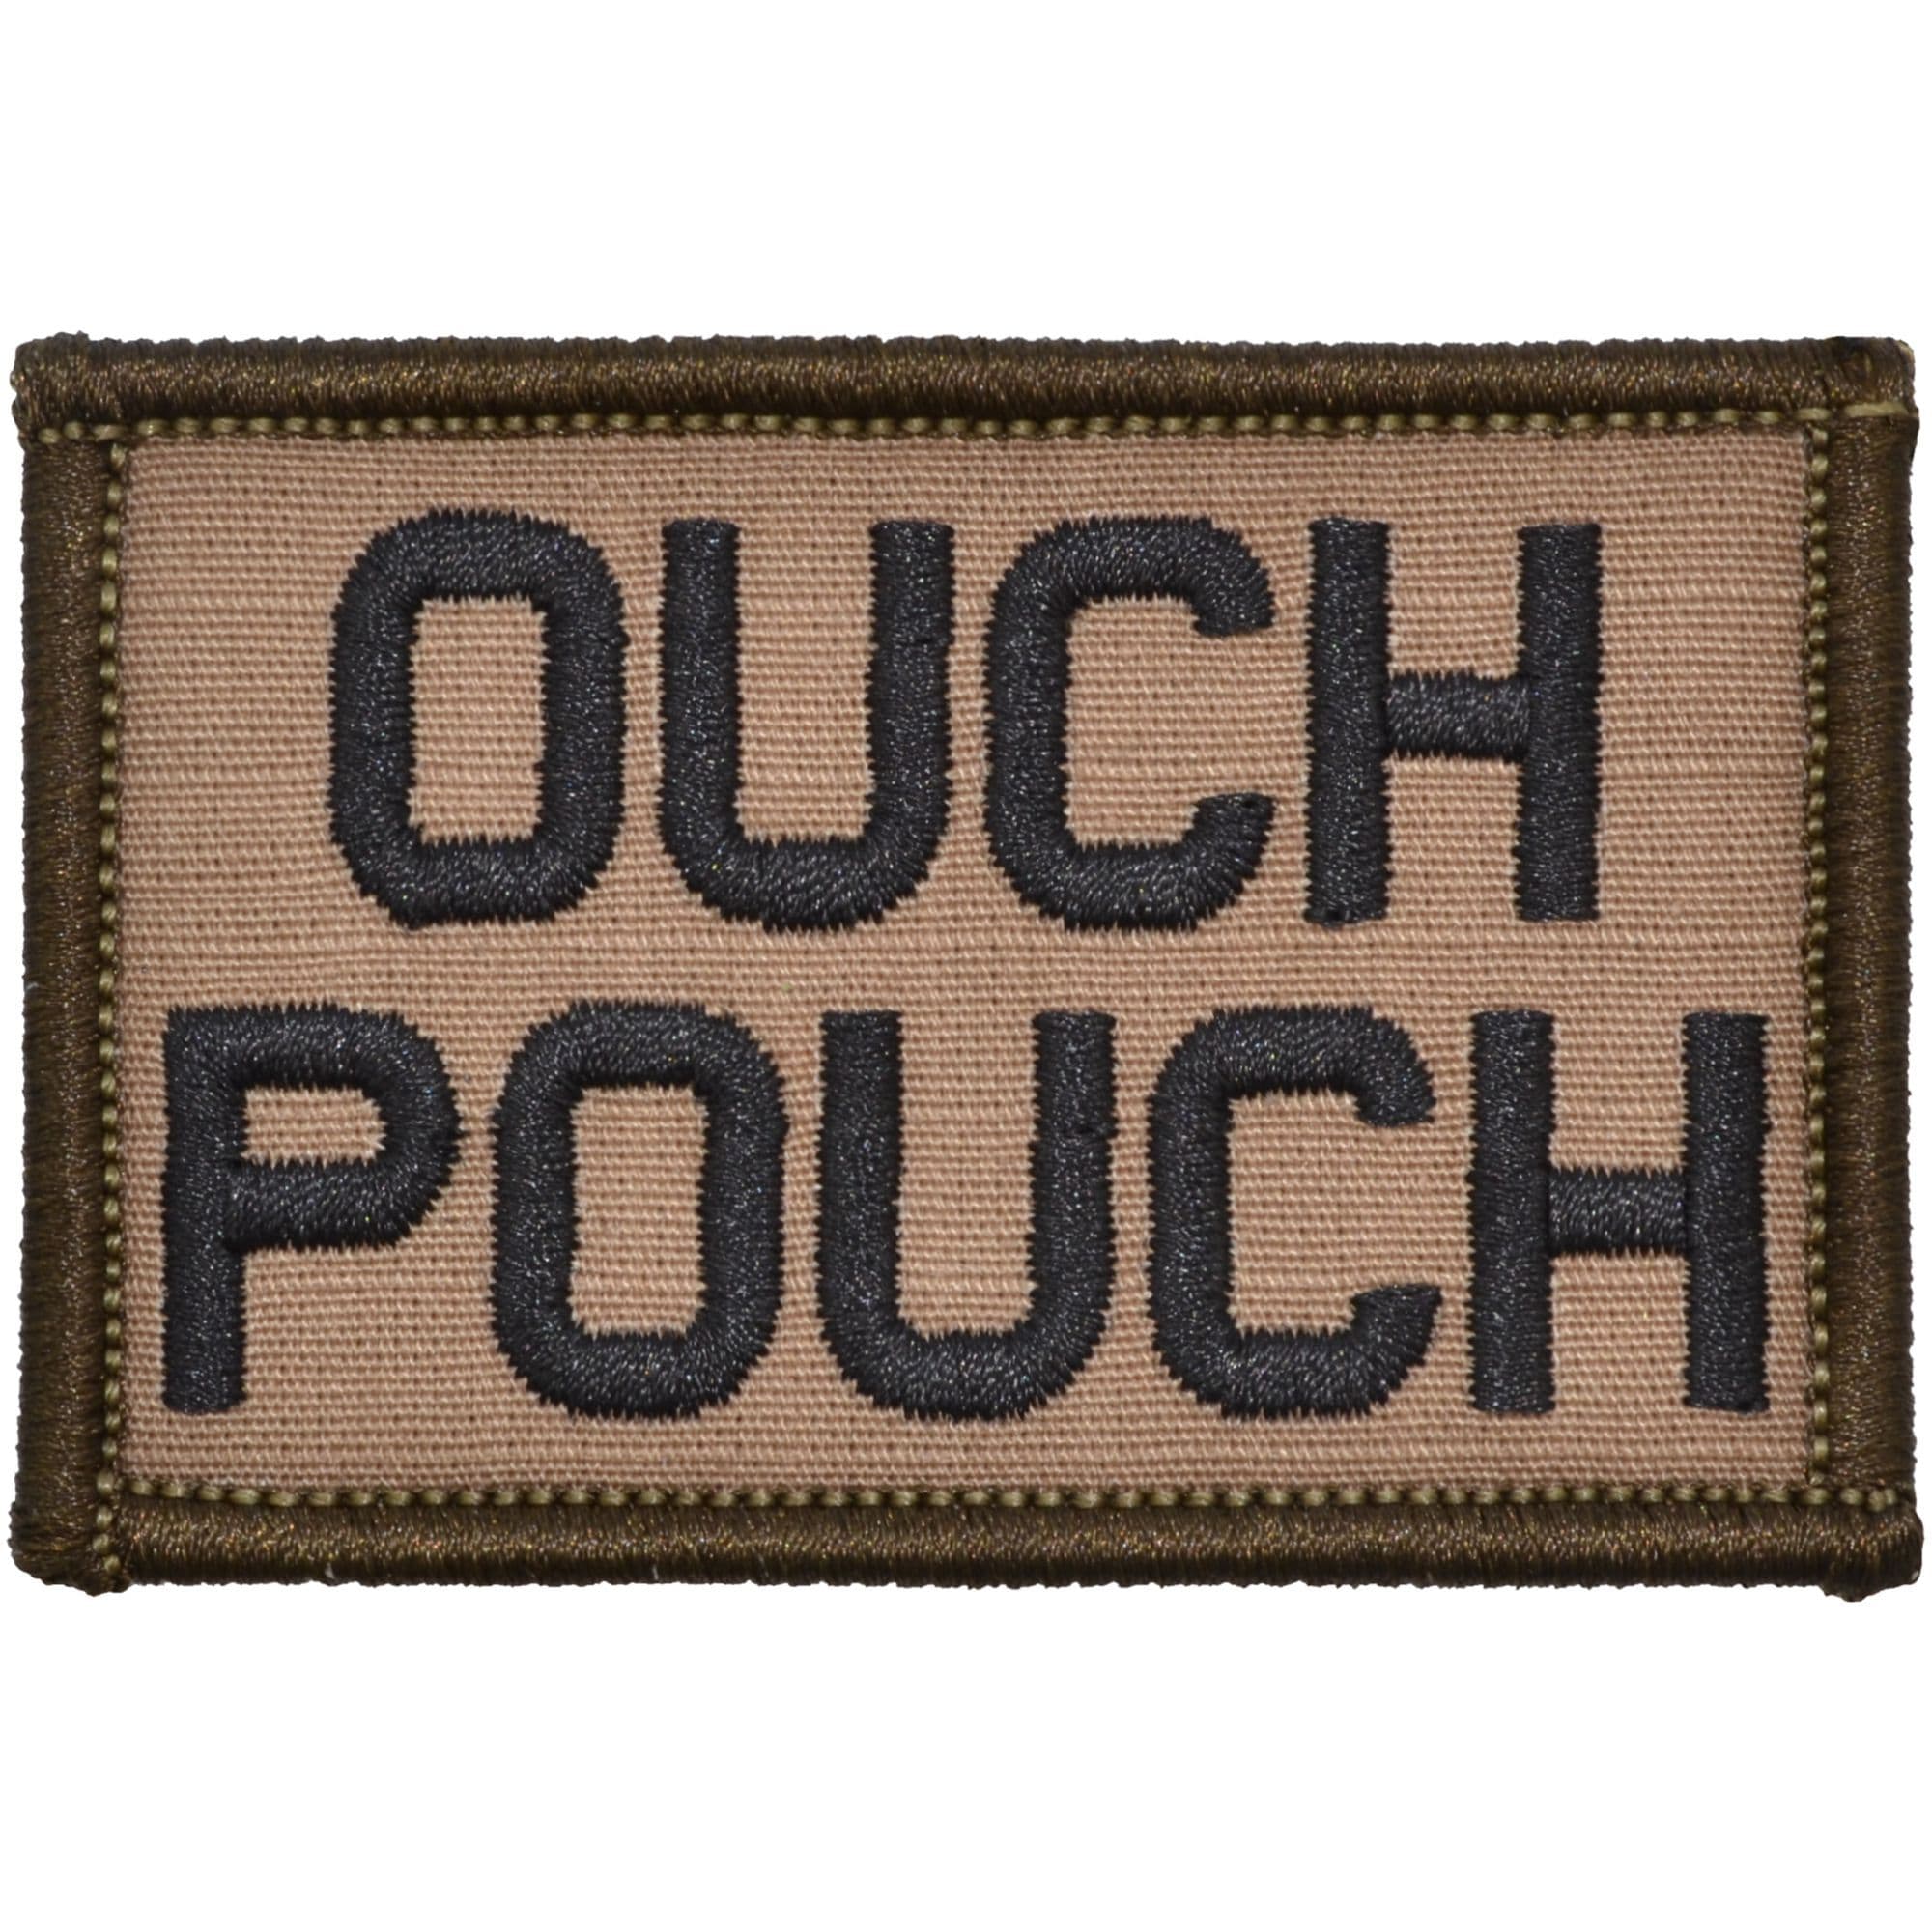 Tactical Gear Junkie Patches Coyote Brown w/ Black Ouch Pouch - 2x3 Patch